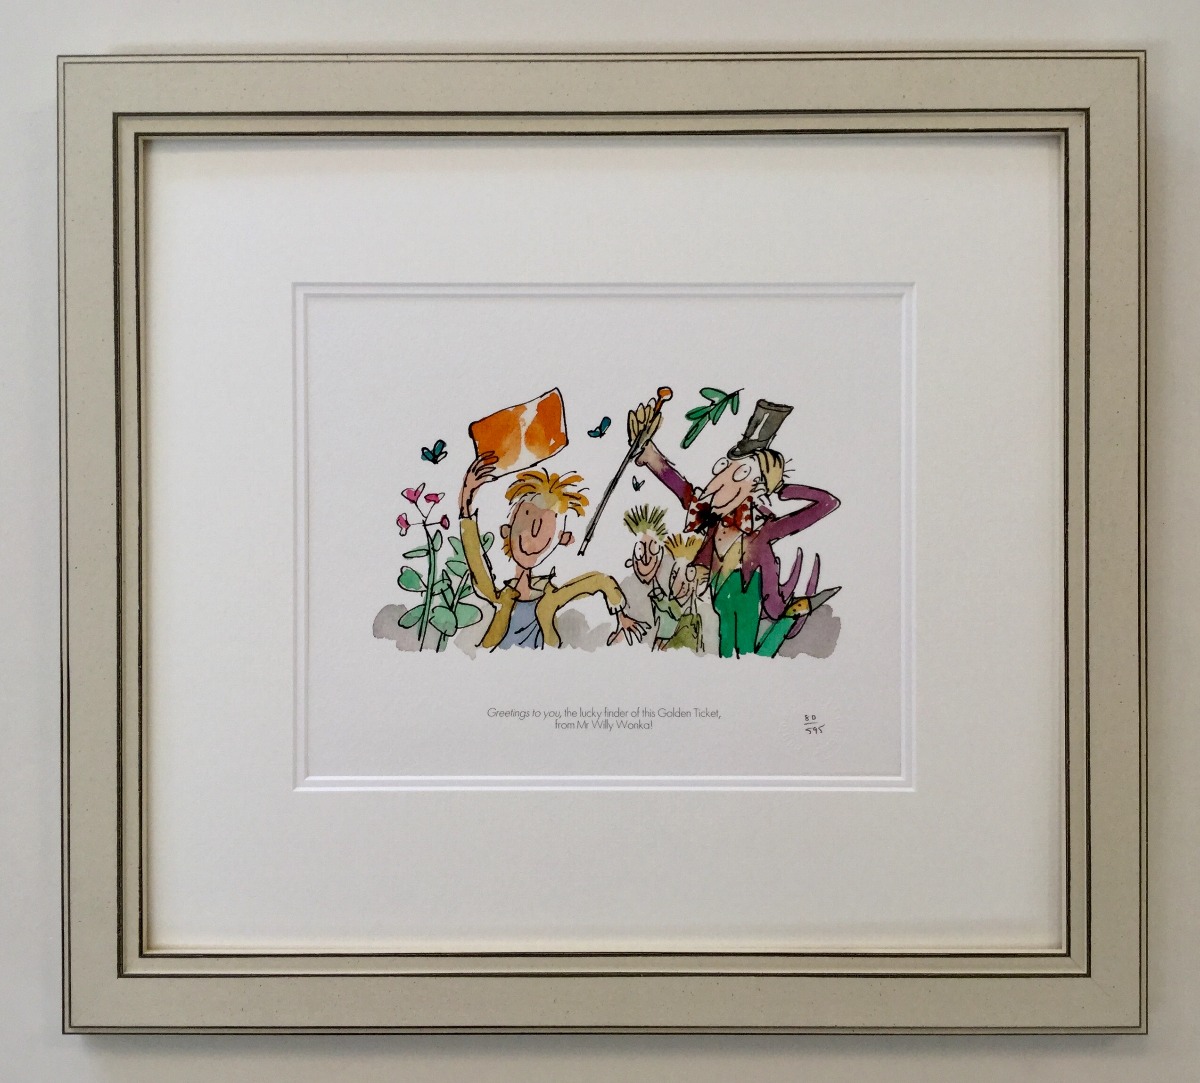 Greetings to You by Quentin Blake